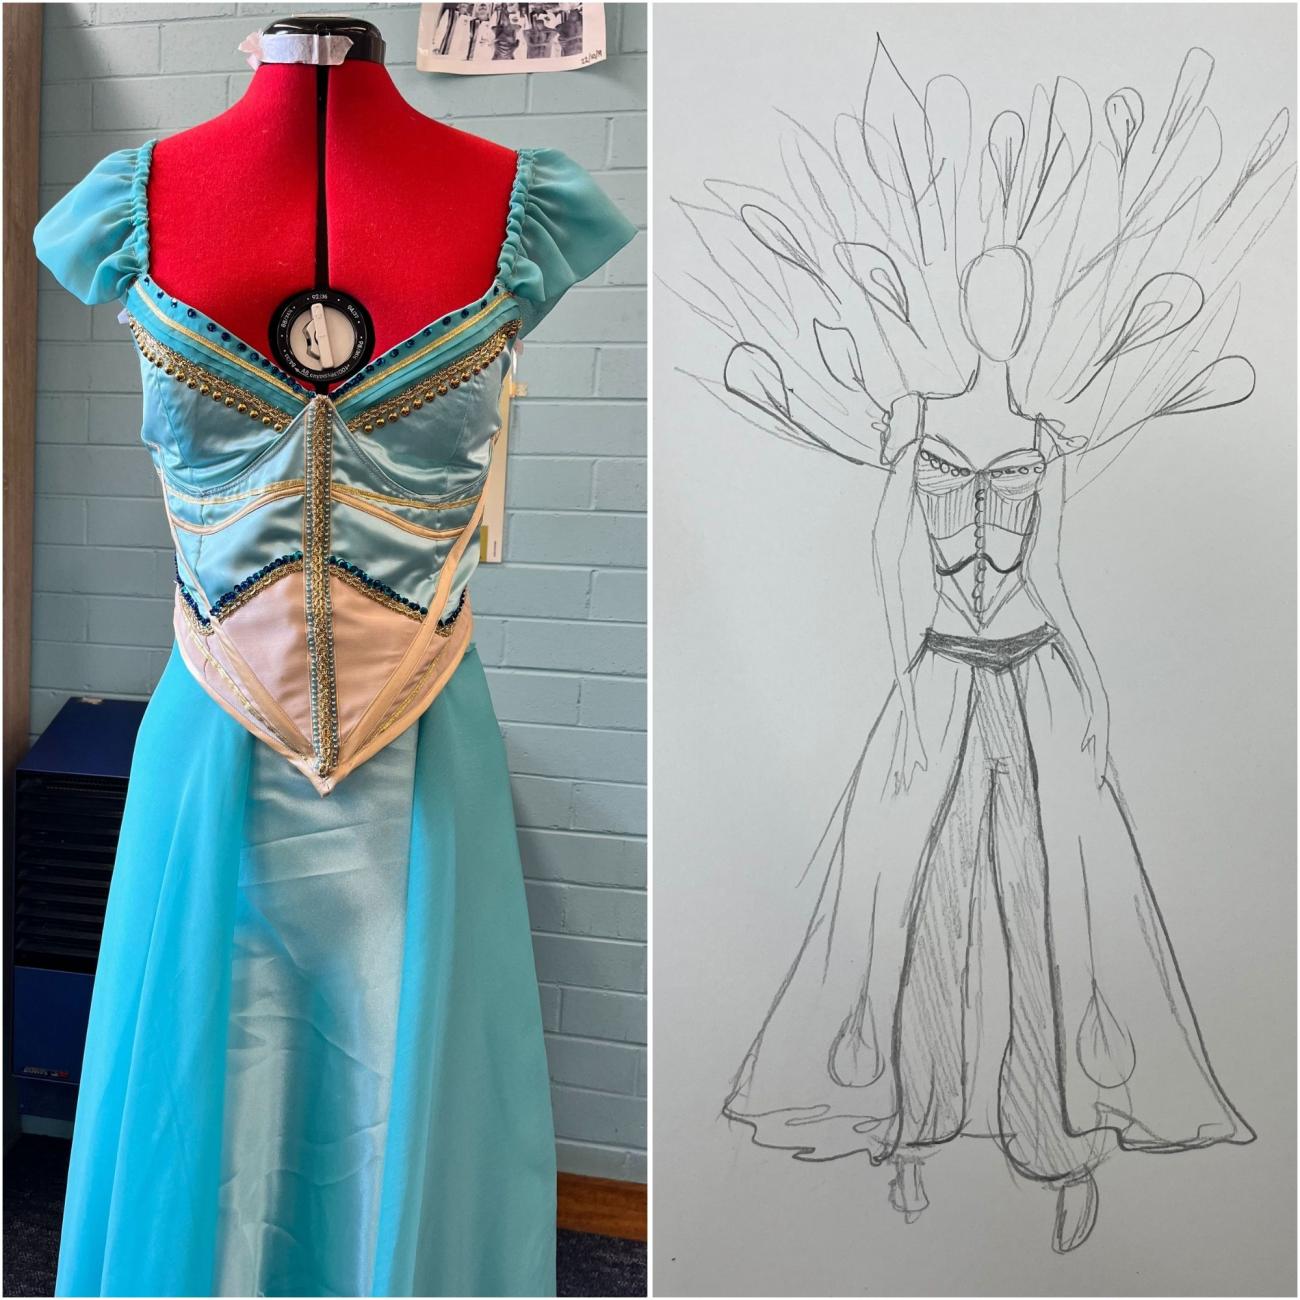 A photo and an illustration of a blue dress with a corset and long flowy skirt